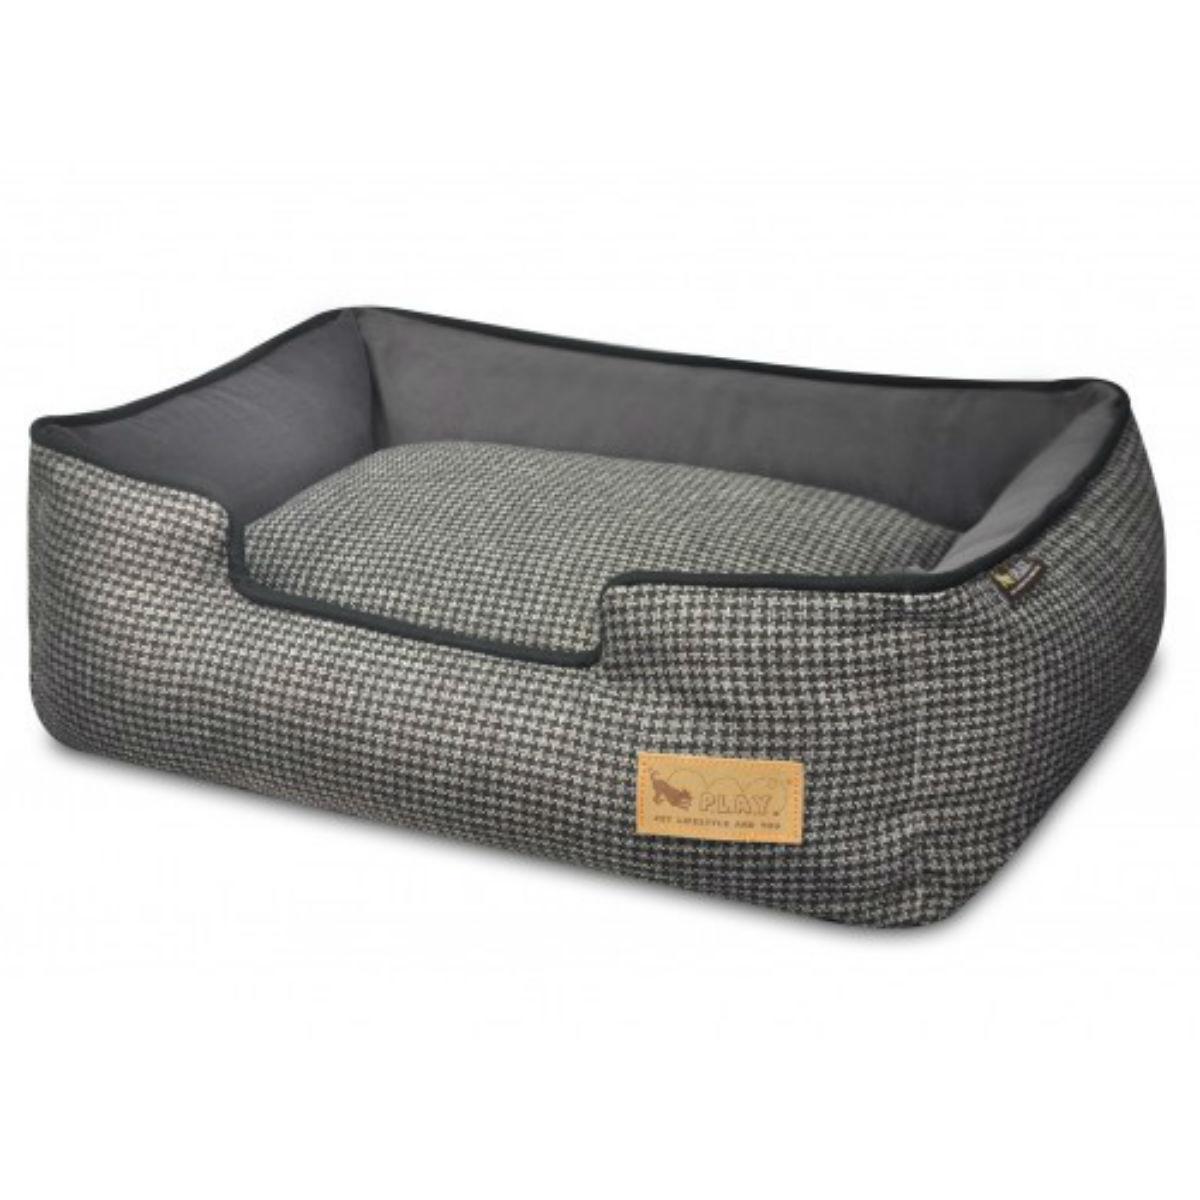 P.L.A.Y. Houndstooth Lounge Dog Bed - Shadow Gray